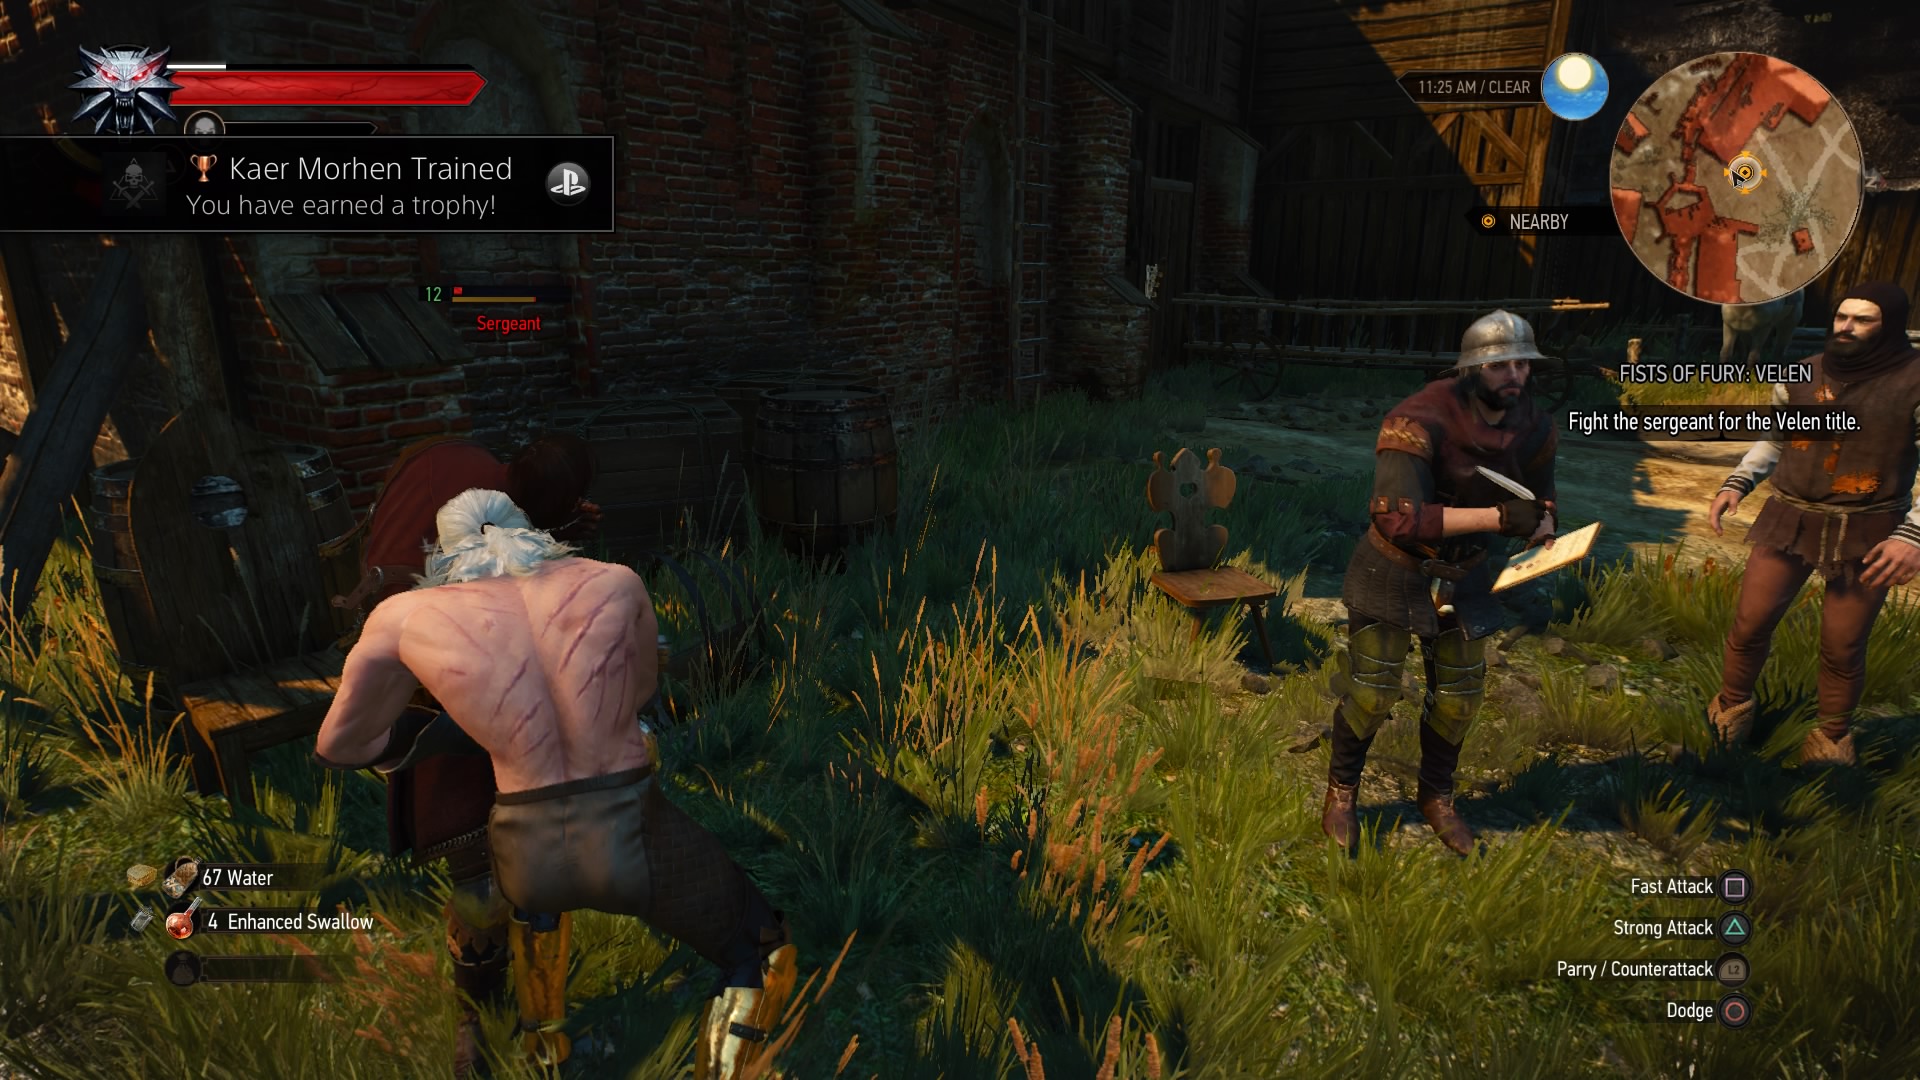 The Witcher 3: Wild Hunt
Kaer Morhen Trained(Bronze)